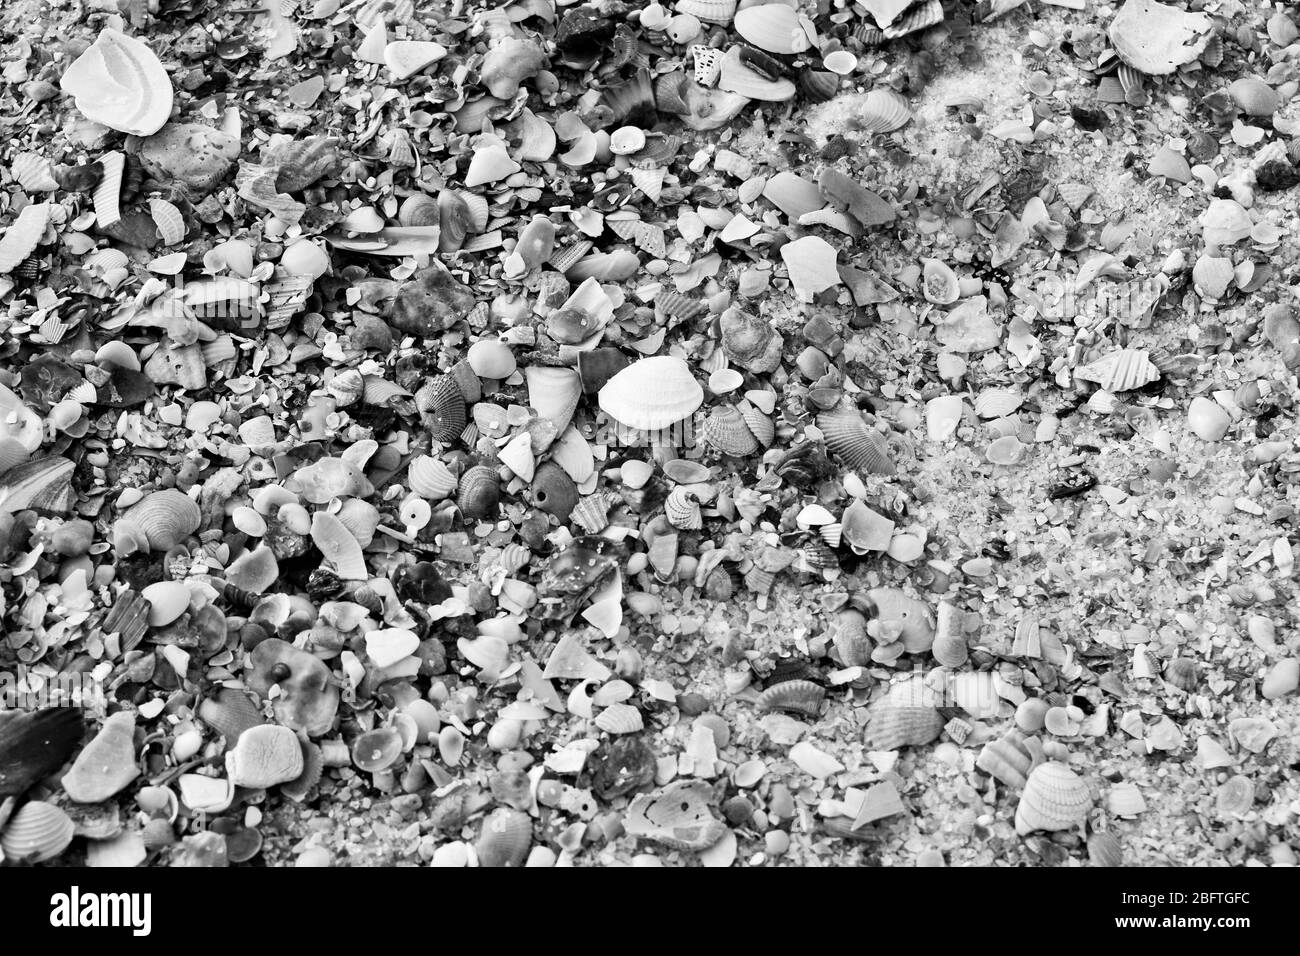 Seashells covering sand in black and white Stock Photo